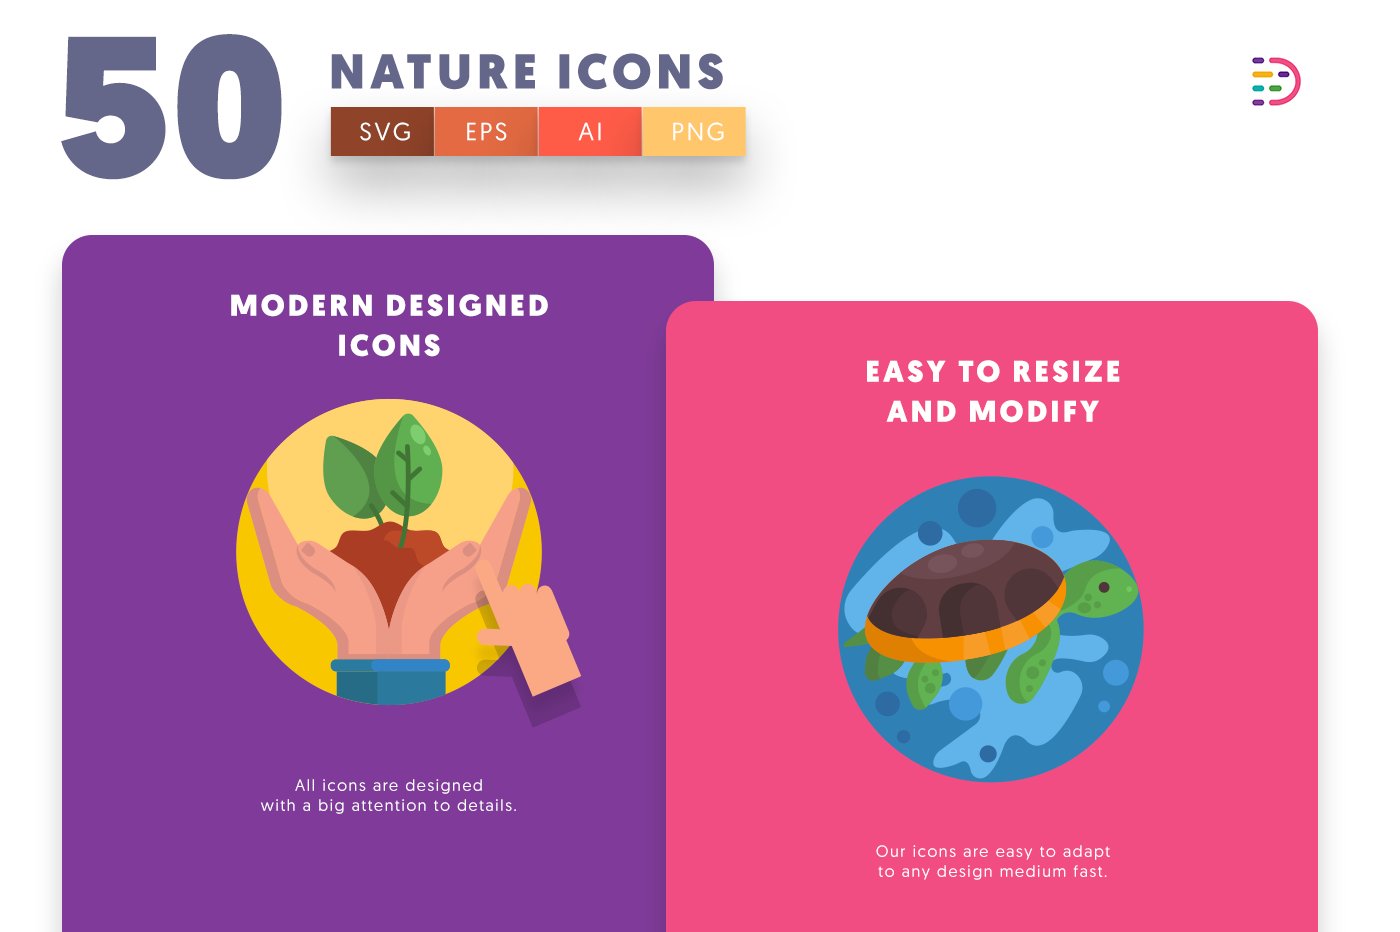 nature icons cover copy 5 464